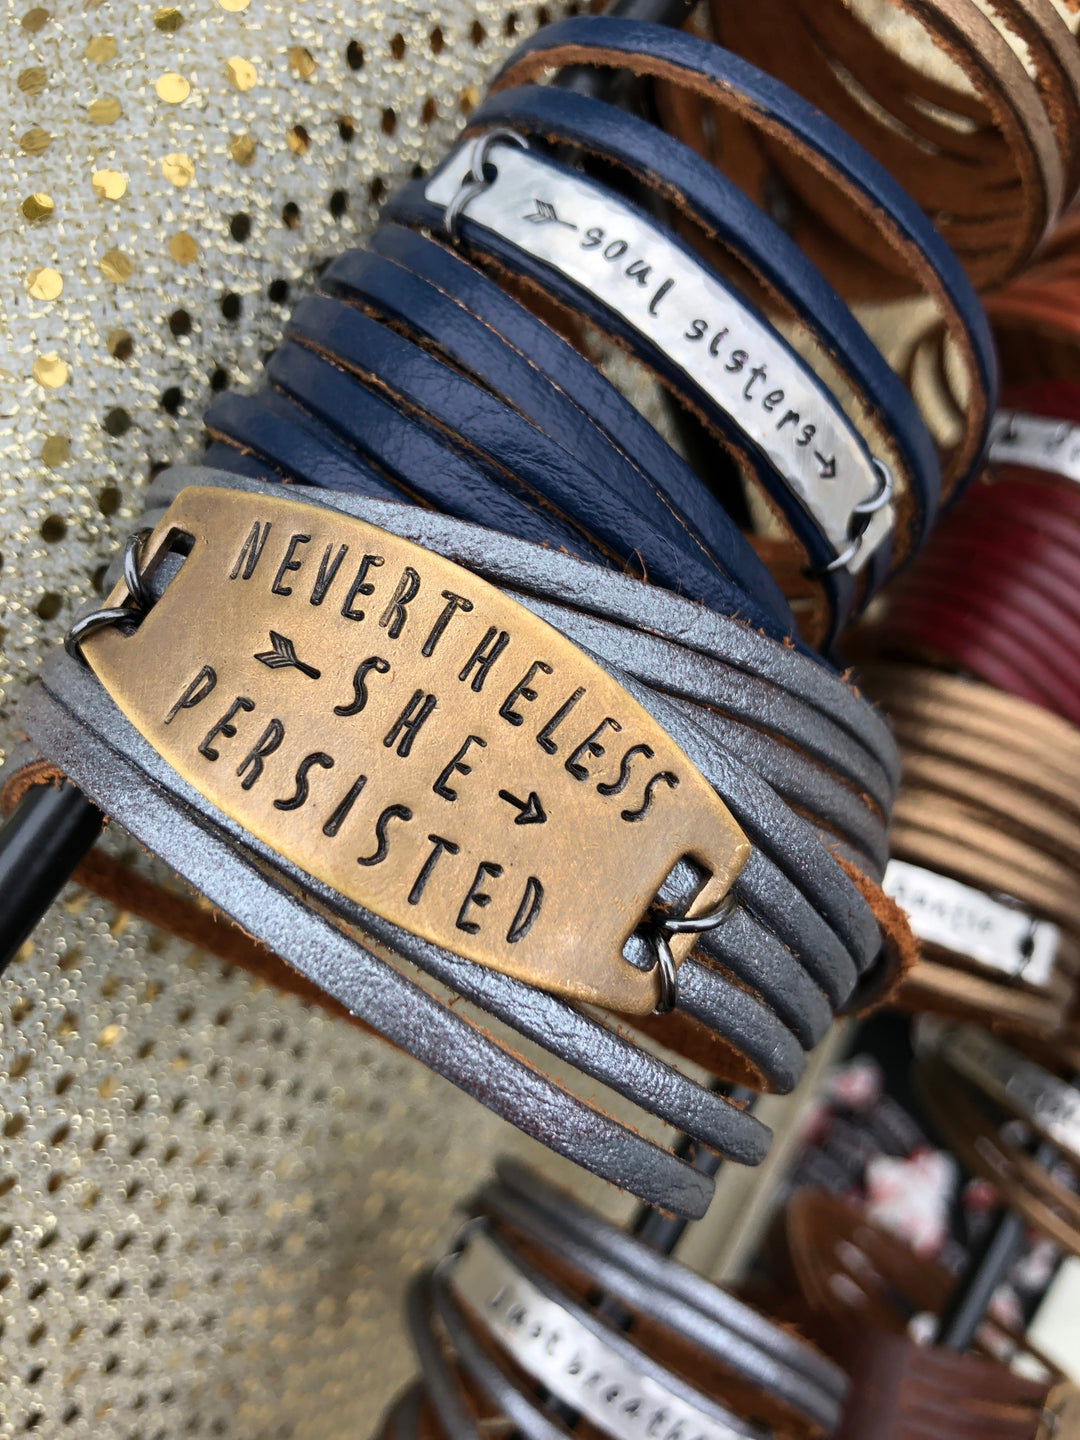 Pewter Leather 'Soul Sisters' Wrap & Bronze Shield Bracelet, adjustable Leather Wrap Create Hope Cuffs nevertheless she persisted 